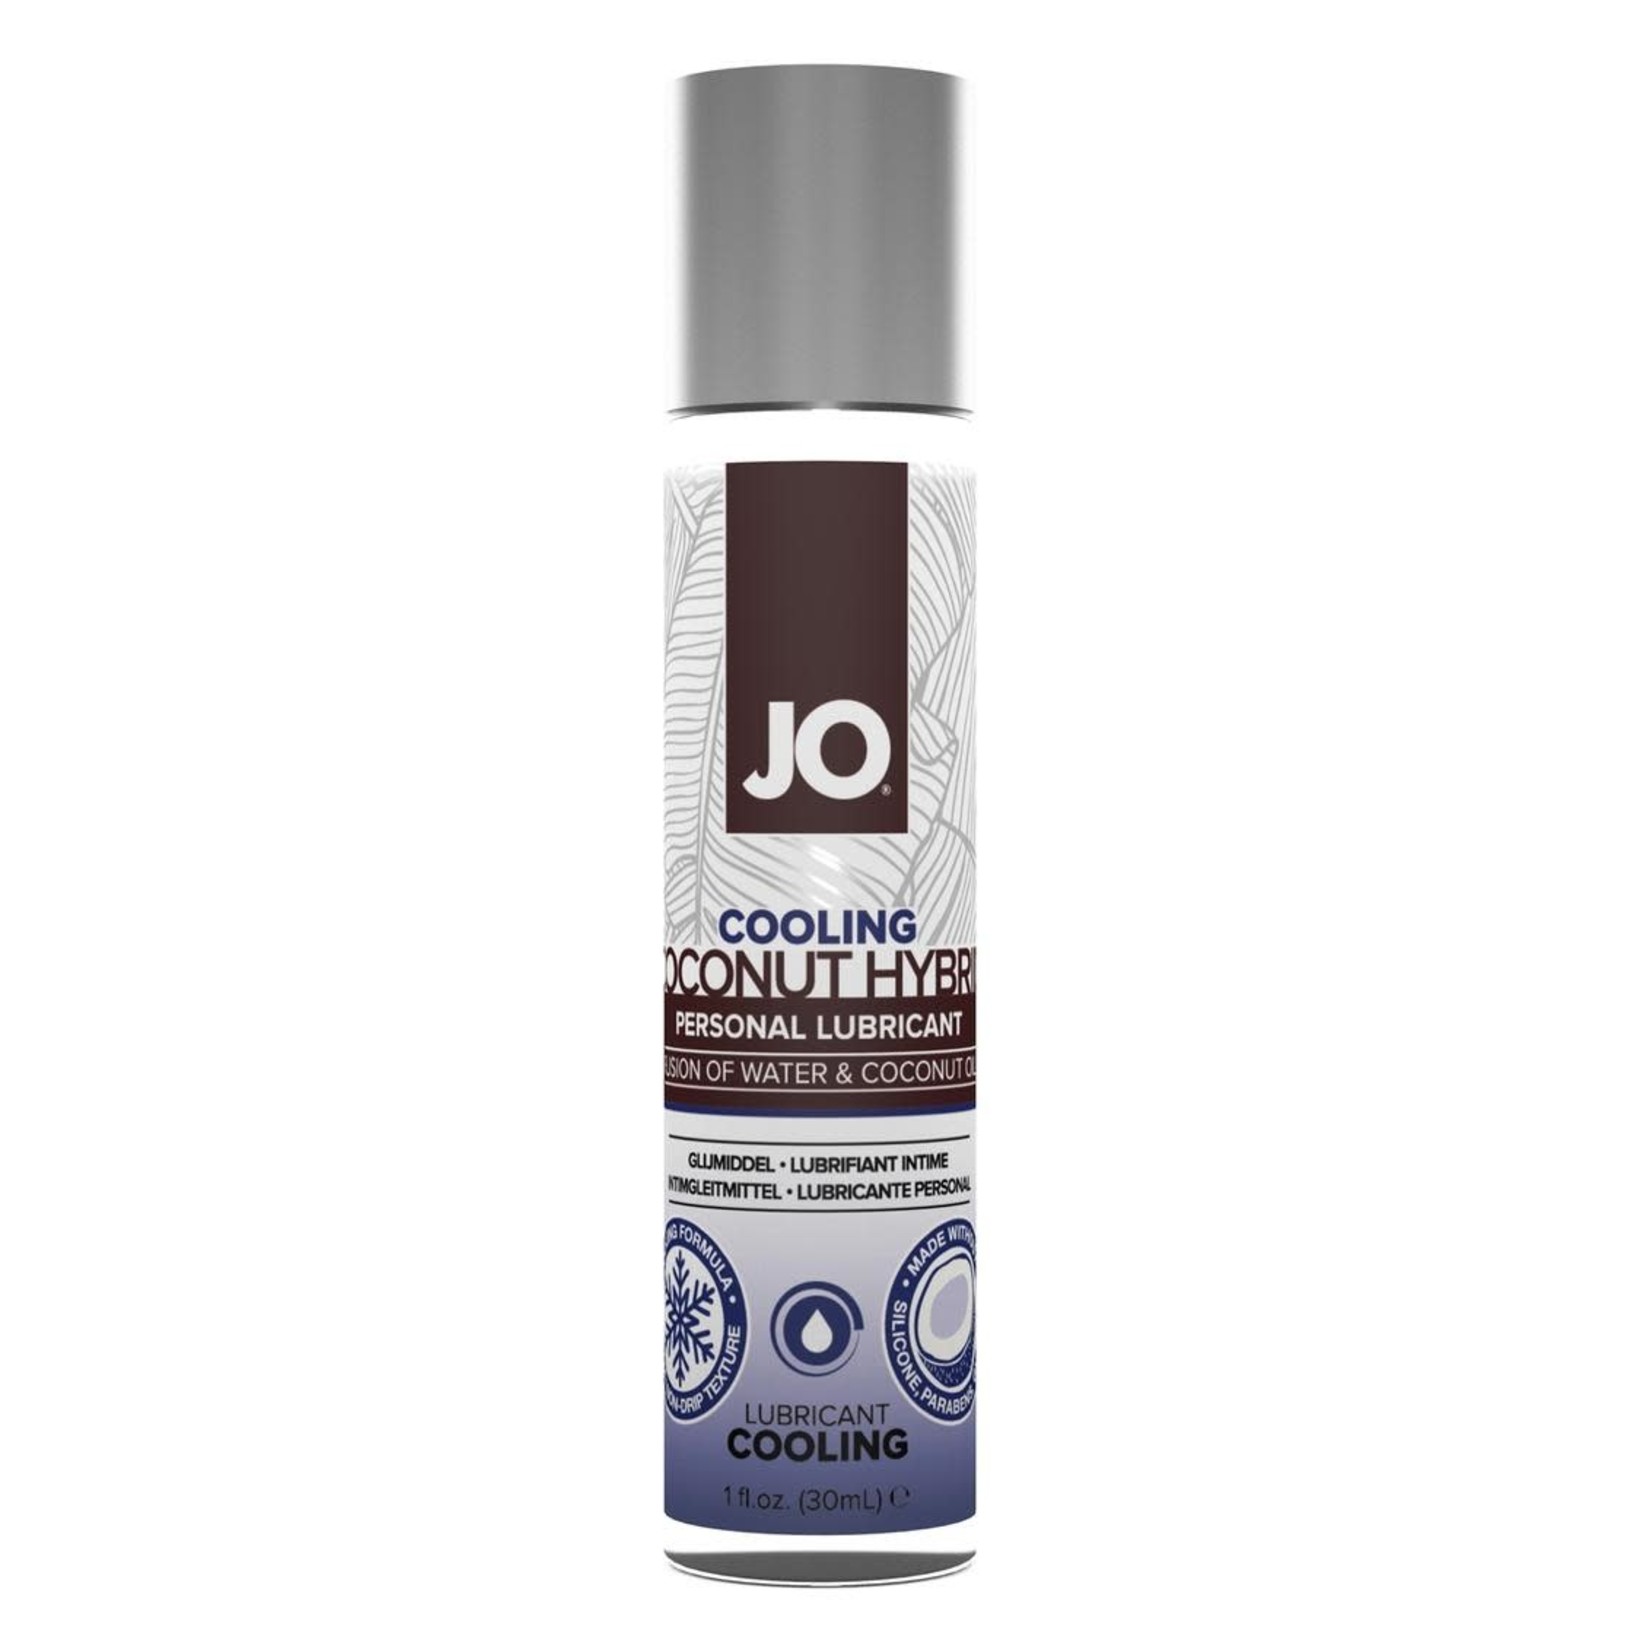 JO Silicone Free Hybrid Personal Cooling Original Lubricant Water and Coconut Oil 1oz